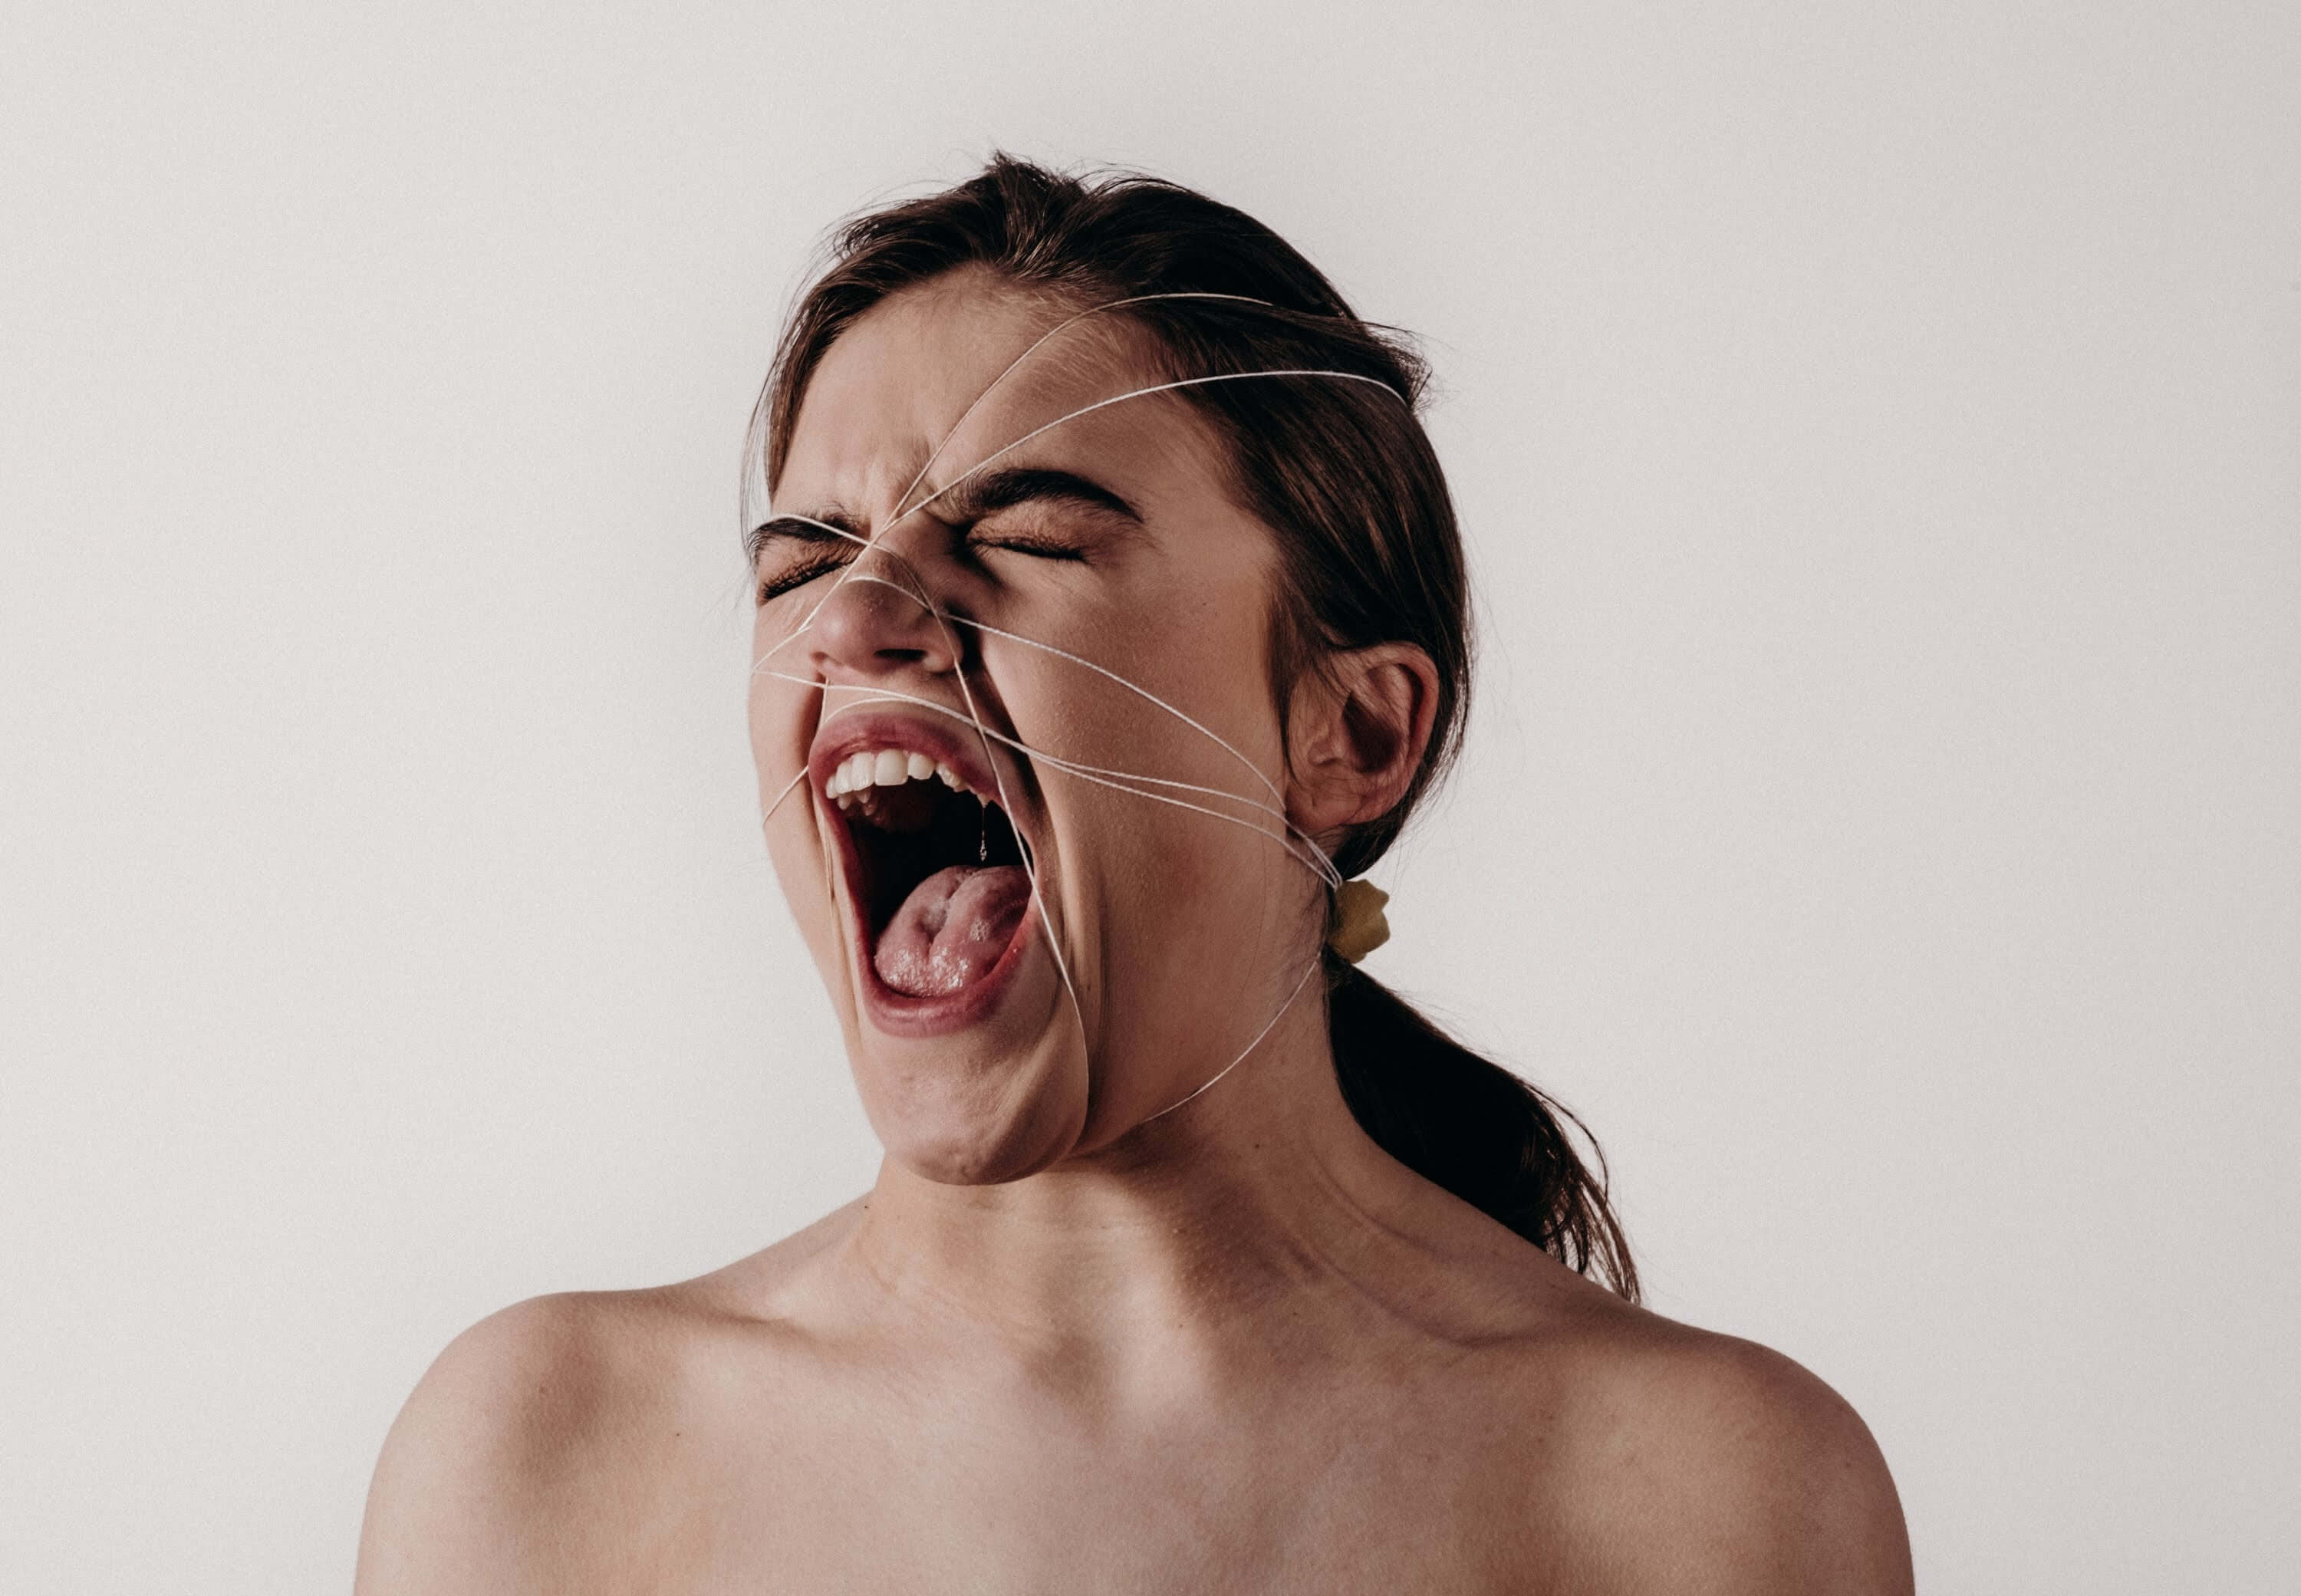 What Do My Female Therapy Clients Have in Common? Anger